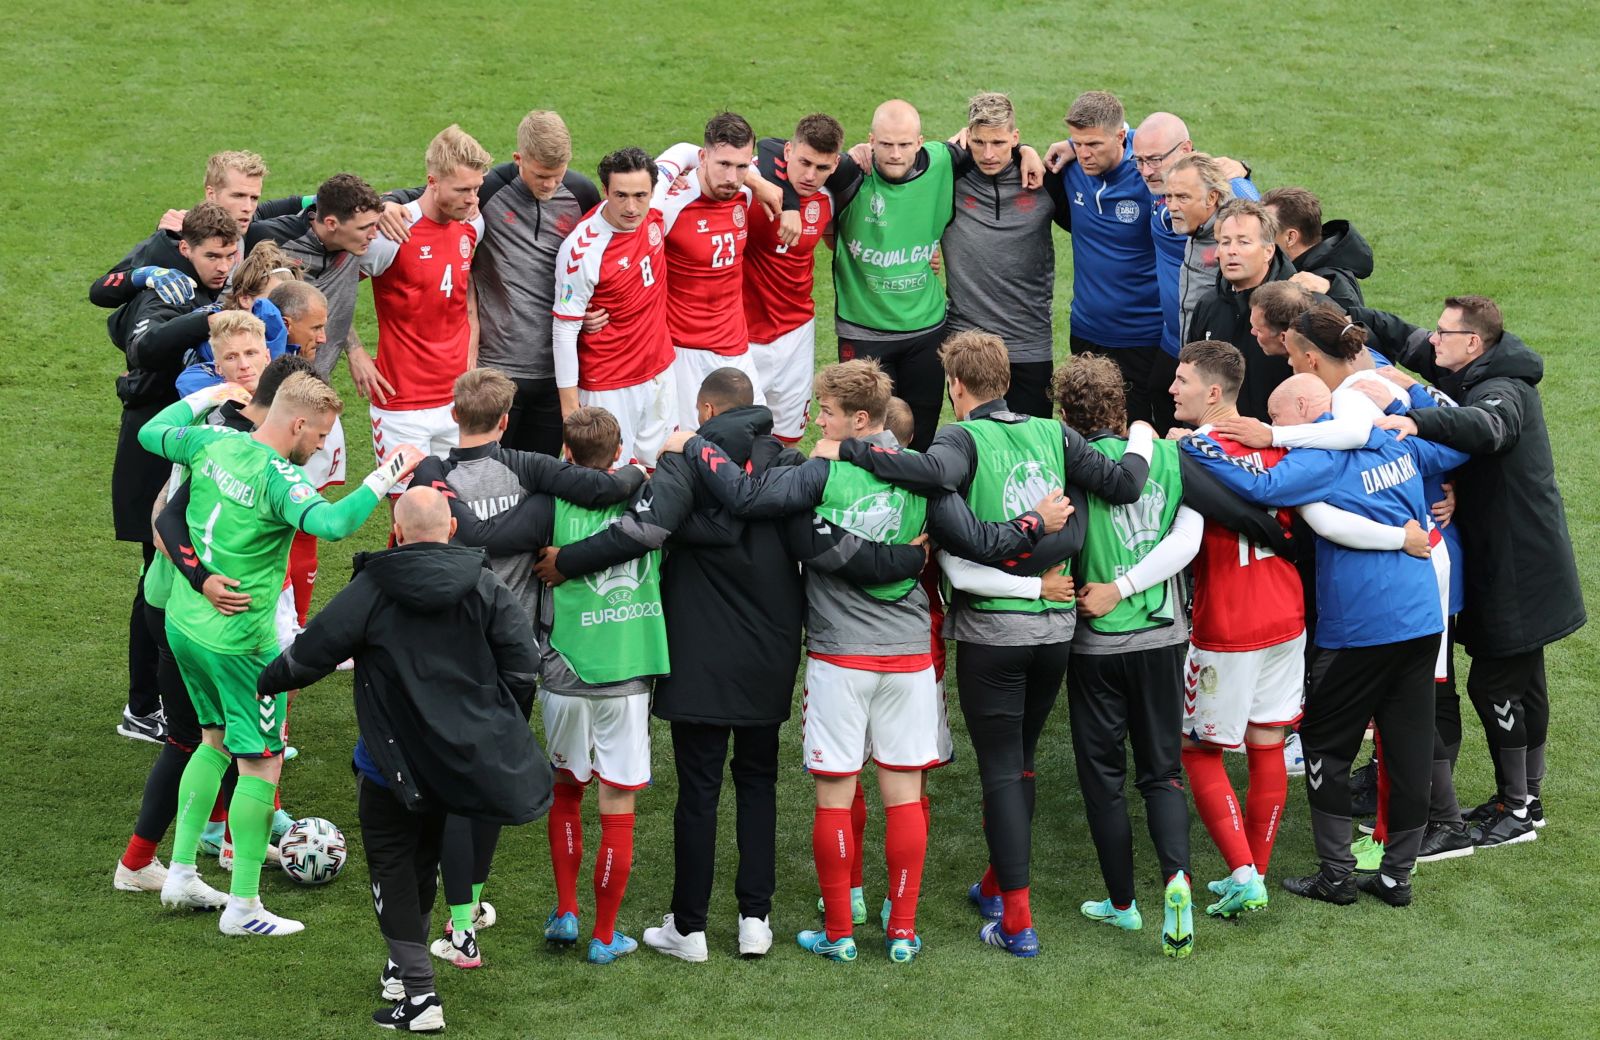 epa09265692 Players of Denmark come together prior to the restart of the UEFA EURO 2020 group B preliminary round soccer match between Denmark and Finland in Copenhagen, Denmark, 12 June 2021.  EPA/Wolfgang Rattay / POOL (RESTRICTIONS: For editorial news reporting purposes only. Images must appear as still images and must not emulate match action video footage. Photographs published in online publications shall have an interval of at least 20 seconds between the posting.)